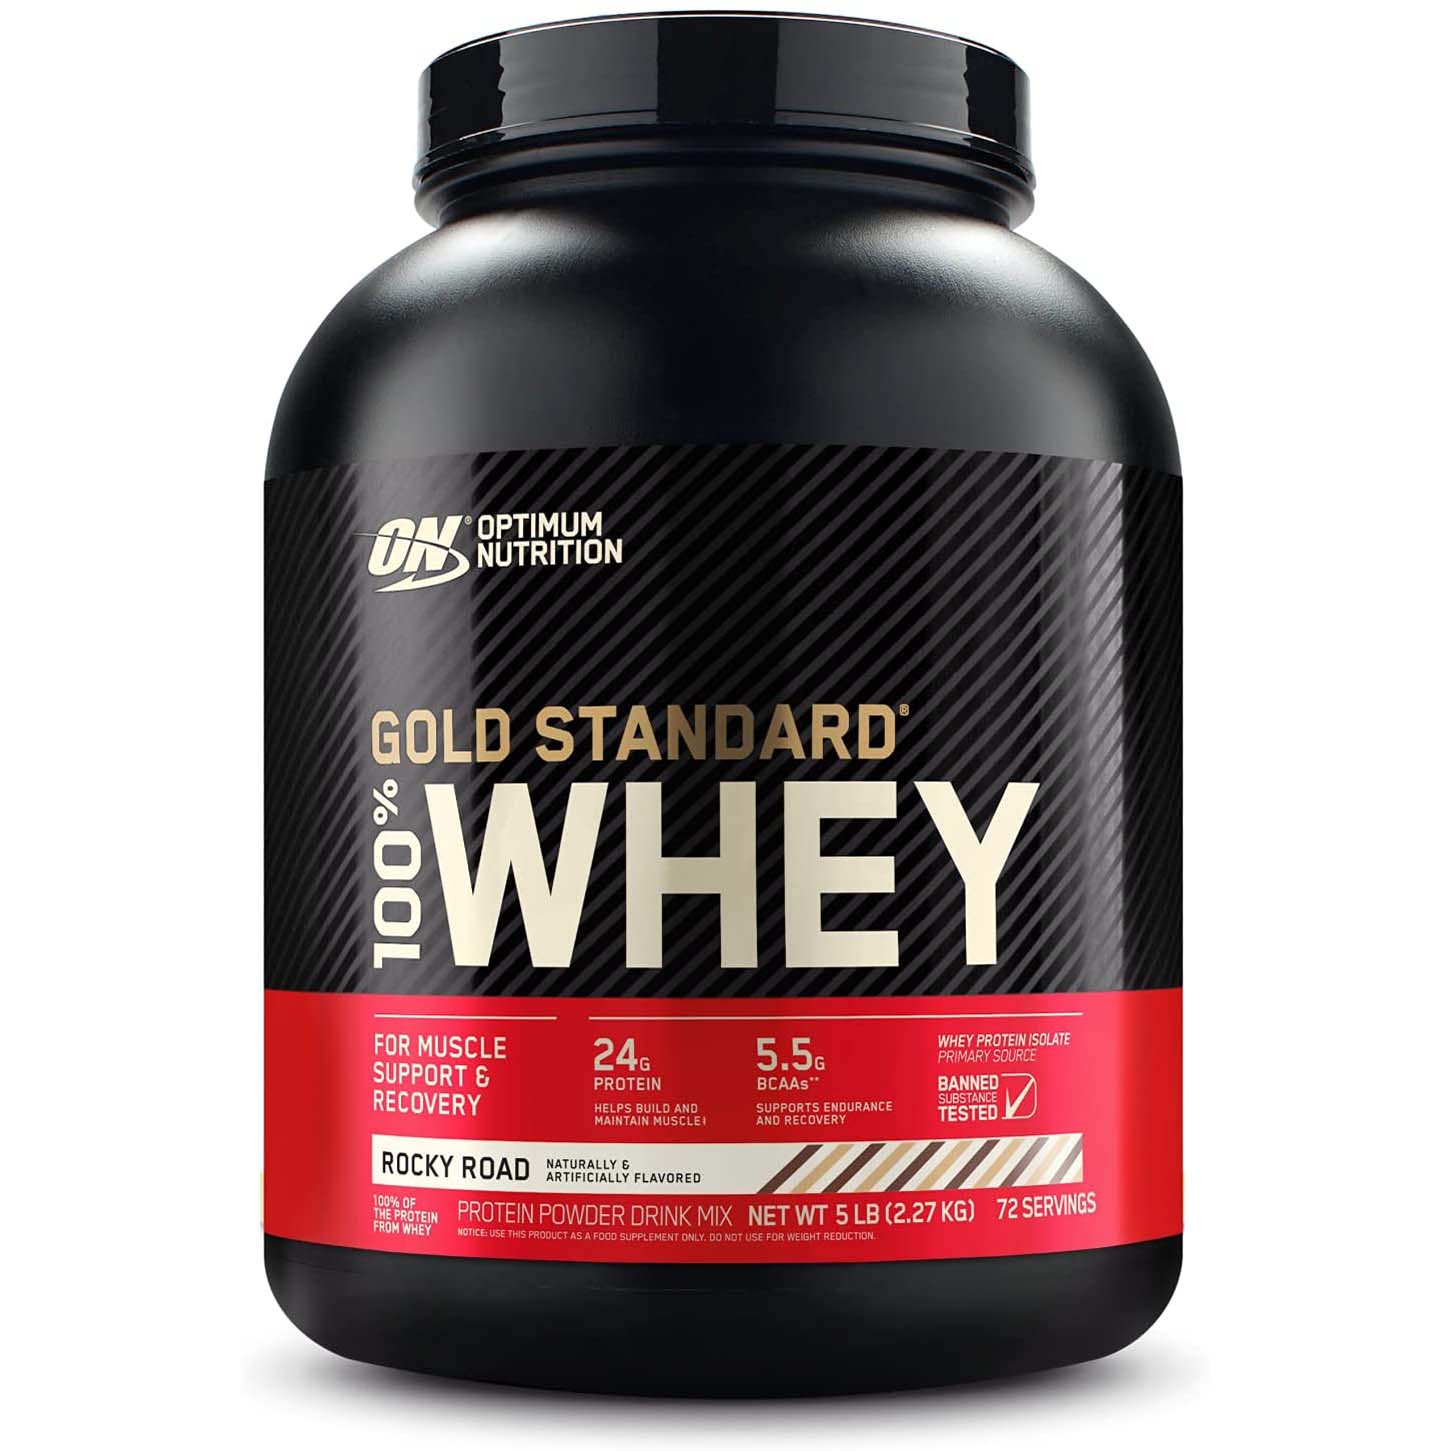 Optimum Nutrition Gold Standard 100% Whey Protein, Rocky Road, 5 LB